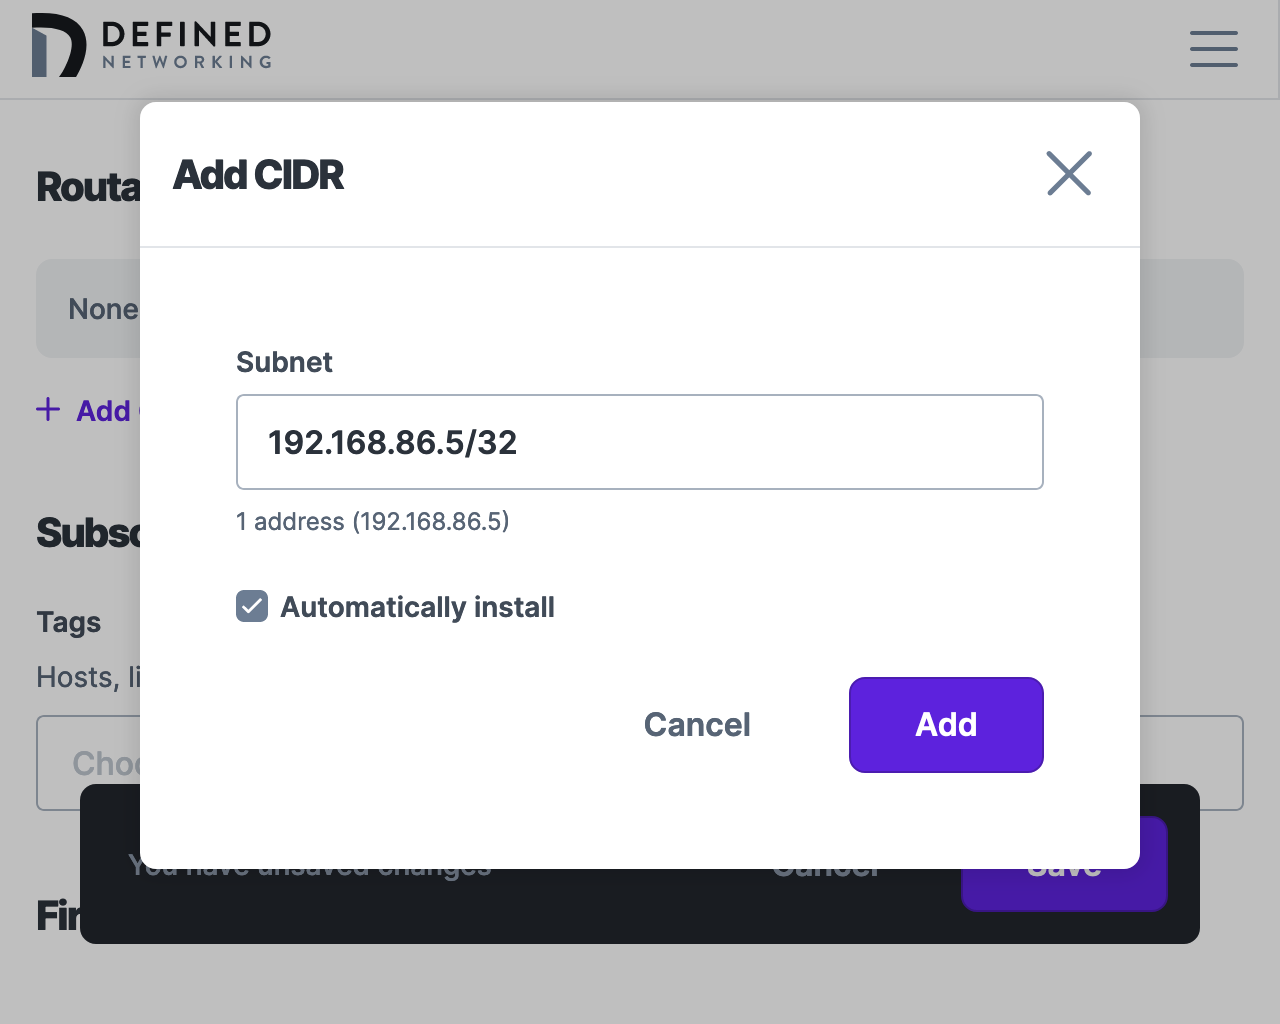 Add Routable CIDR modal demonstrating entry of a /32 CIDR with the checkbox labelled “Automatically install” checked